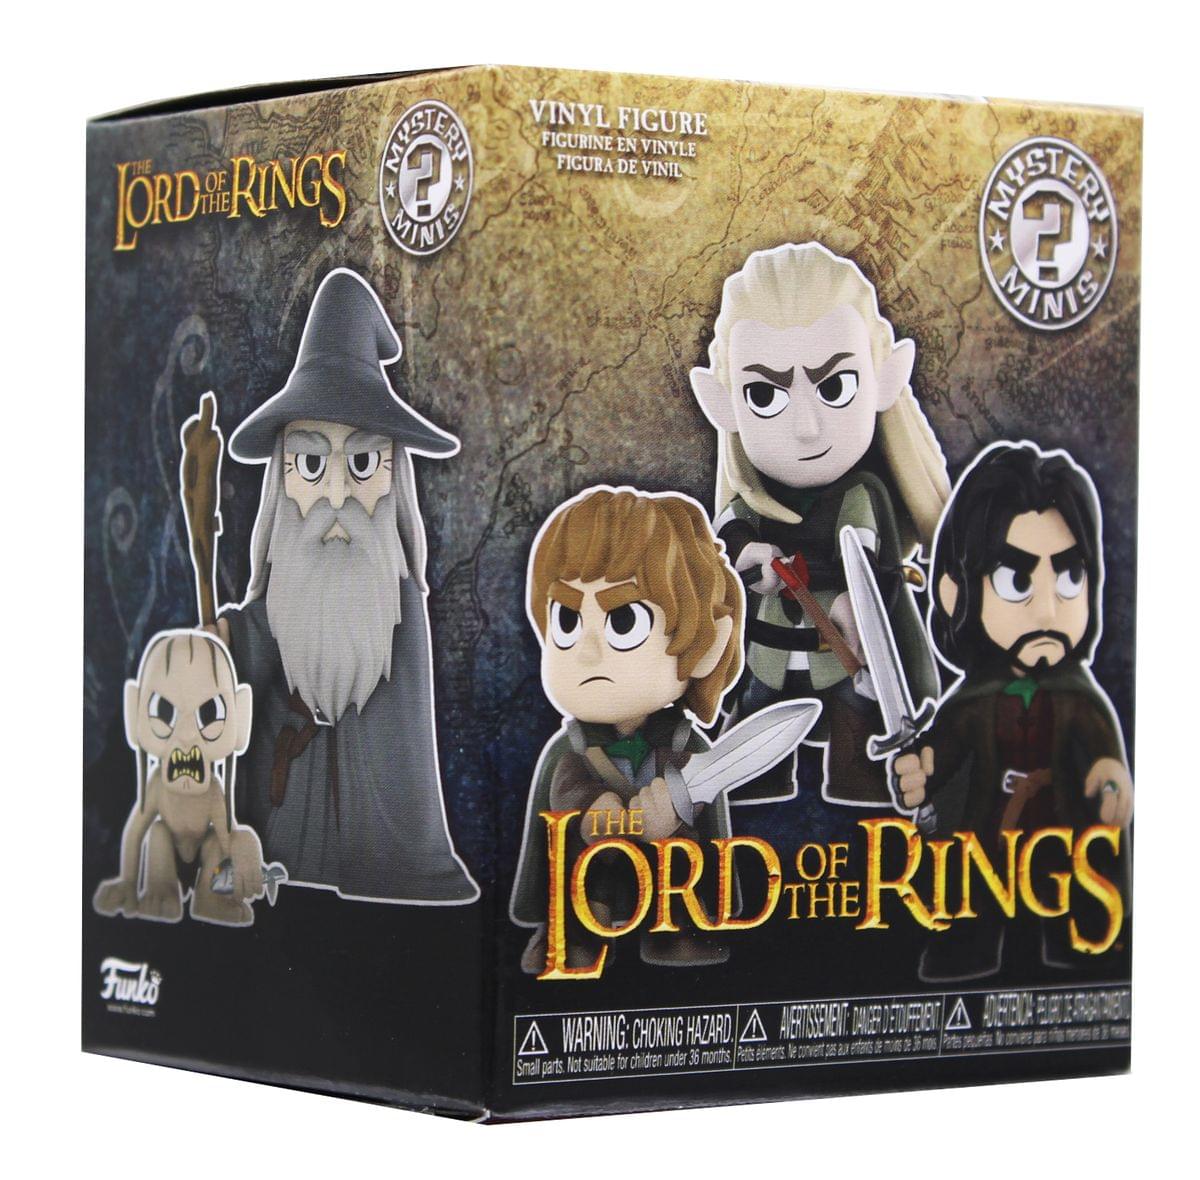 Lord of the Rings Blind Bagged Mystery Minis, One Random